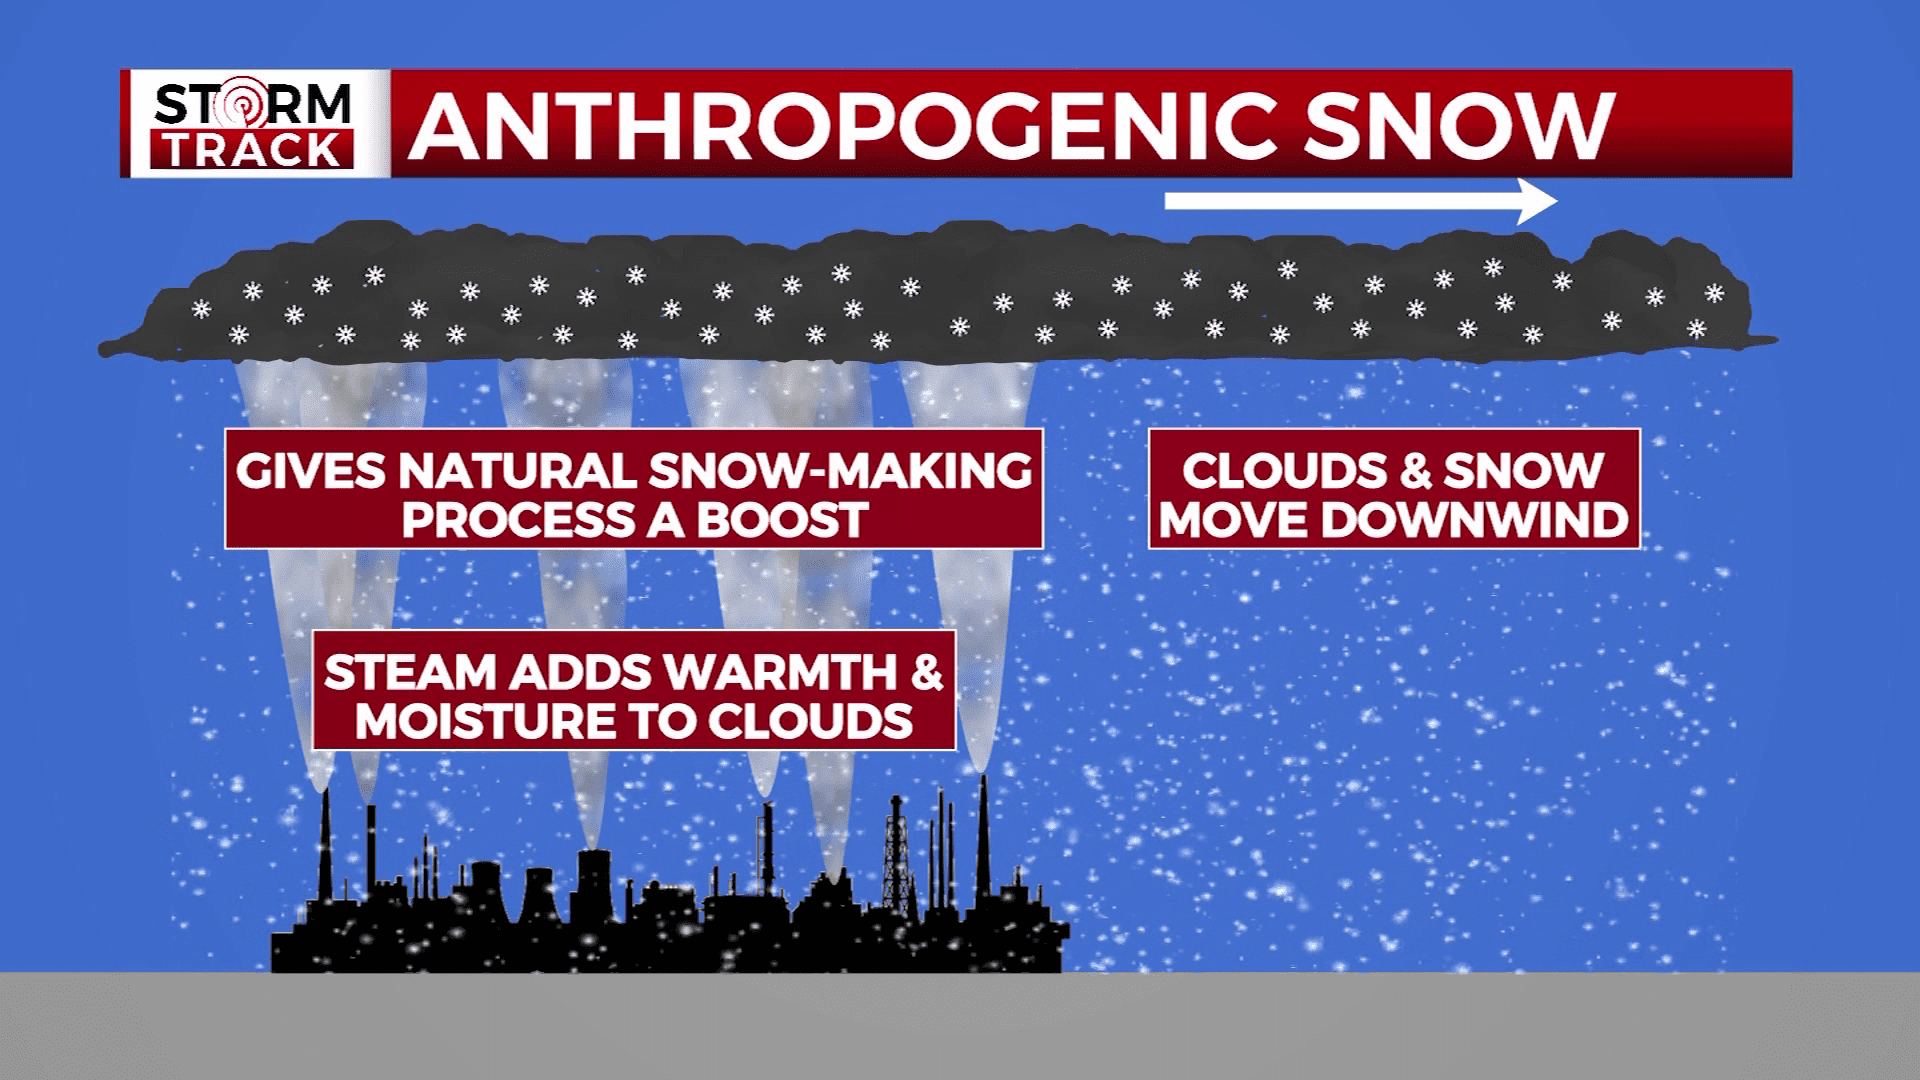 Graphic breaking down the process of anthropogenic snow